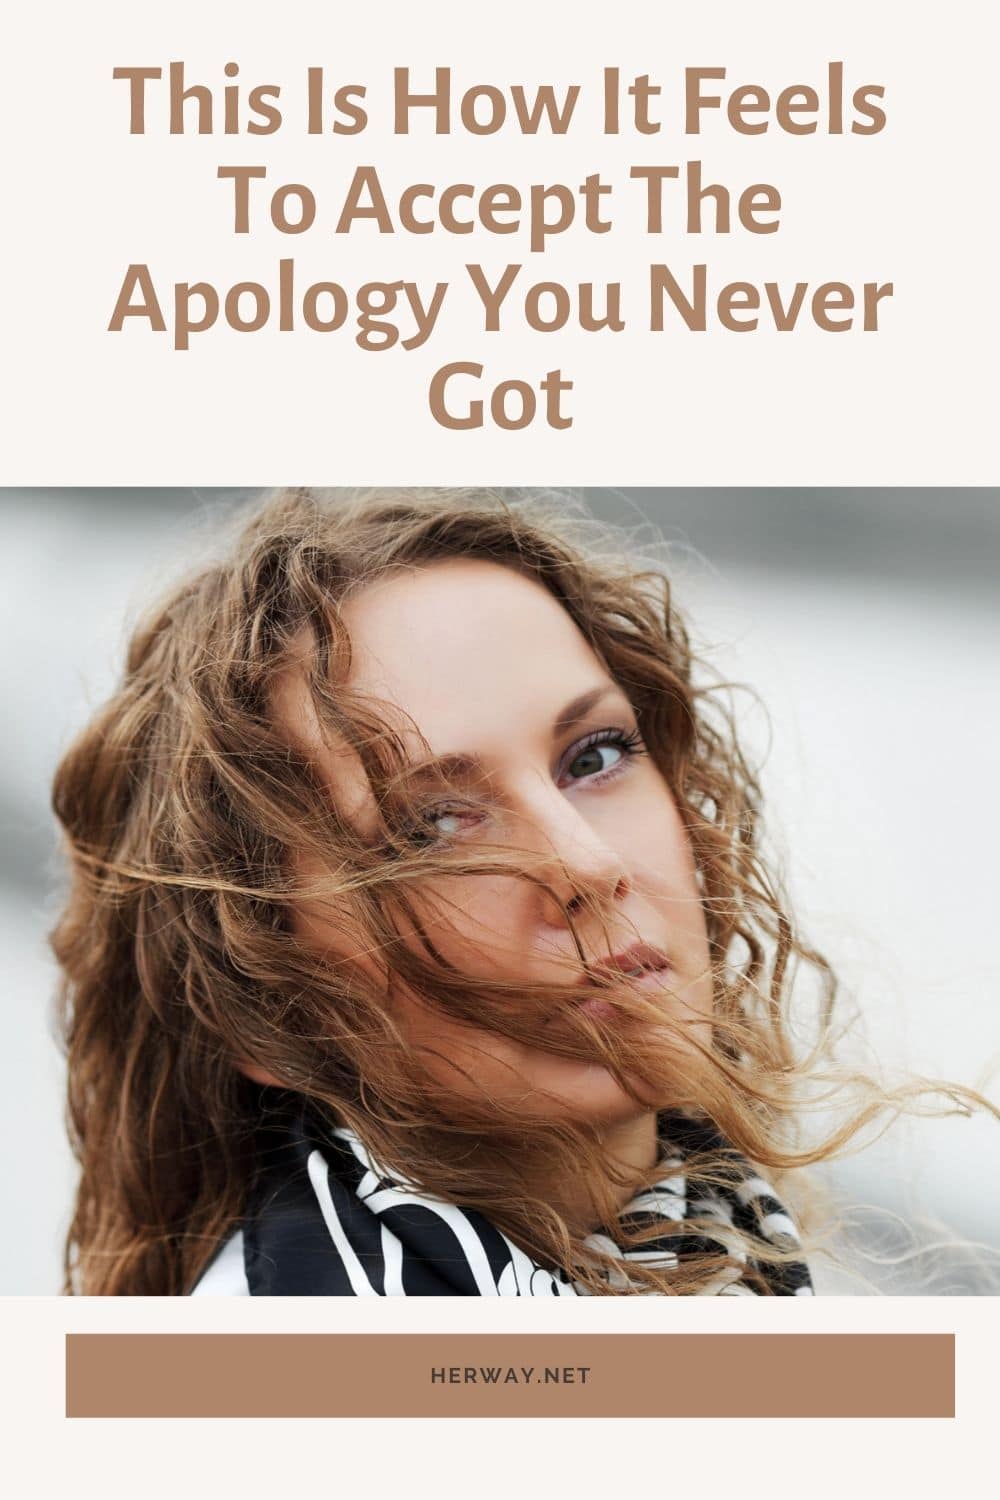 This Is How It Feels To Accept The Apology You Never Got